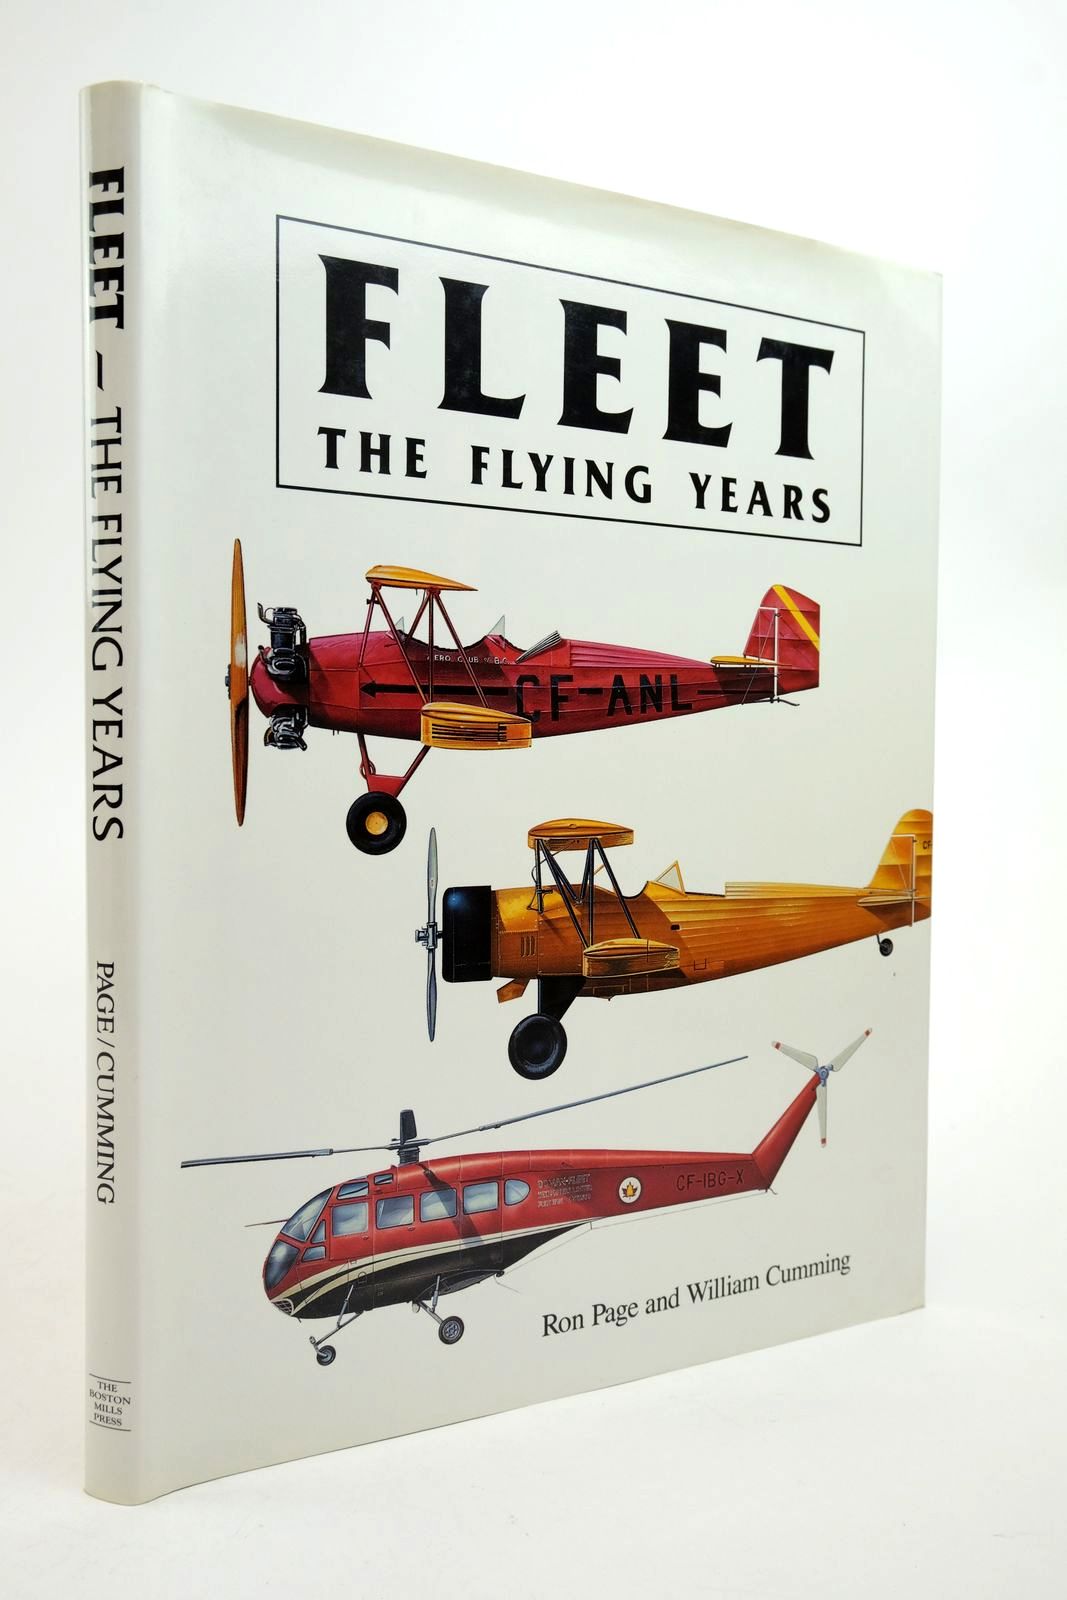 Photo of FLEET - THE FLYING YEARS written by Page, Ron Cumming, William published by The Boston Mills Press (STOCK CODE: 2139360)  for sale by Stella & Rose's Books